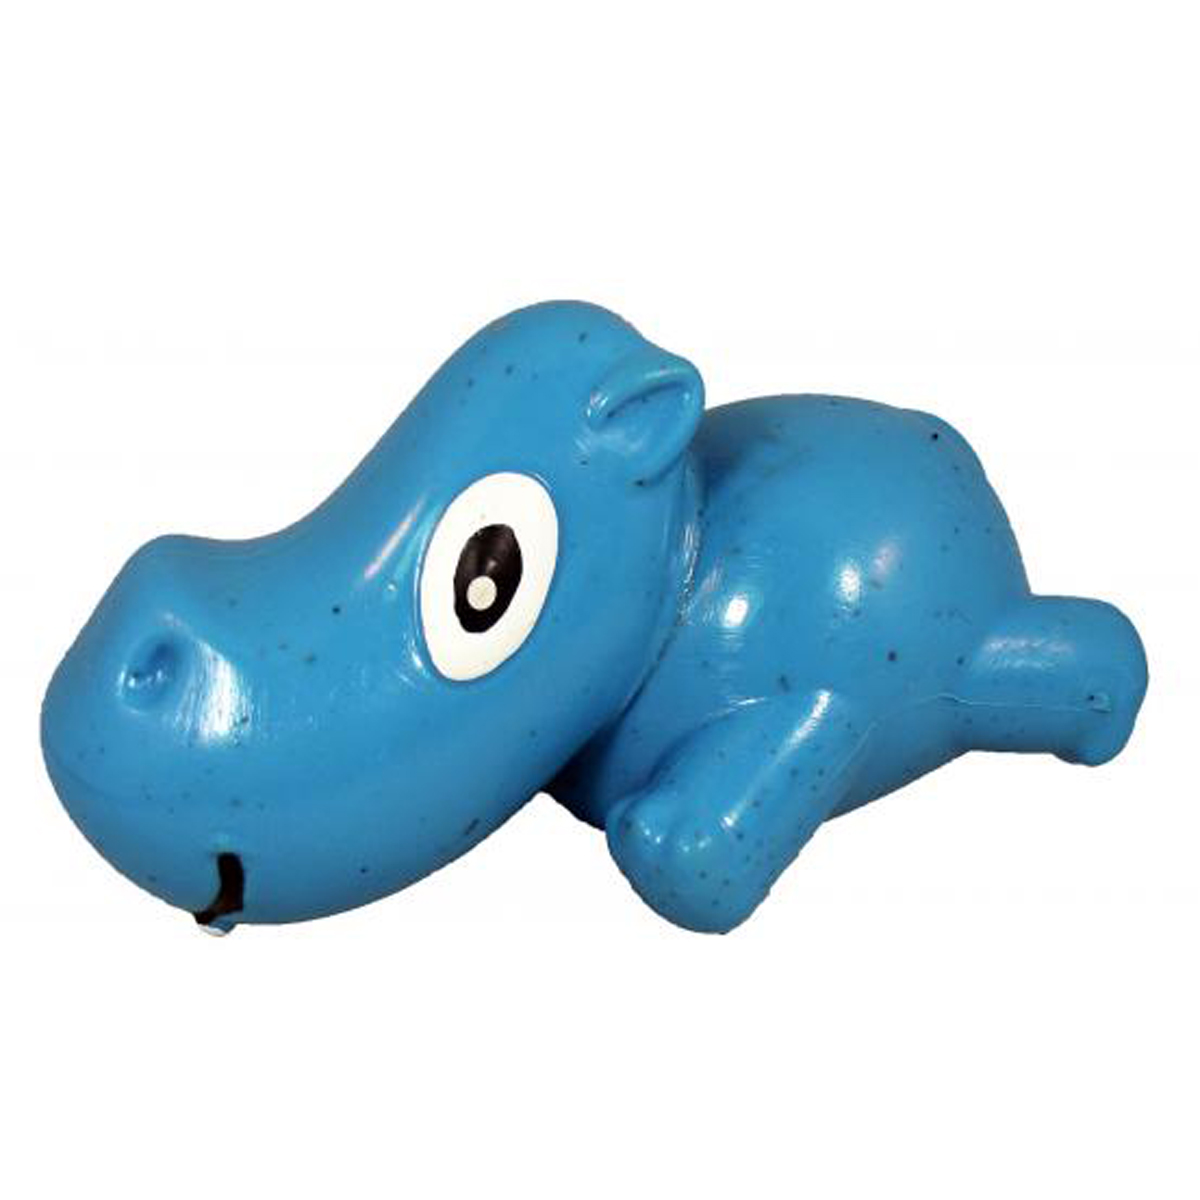 Cycle Dog 3-Play Hippo Dog Toy - Blue